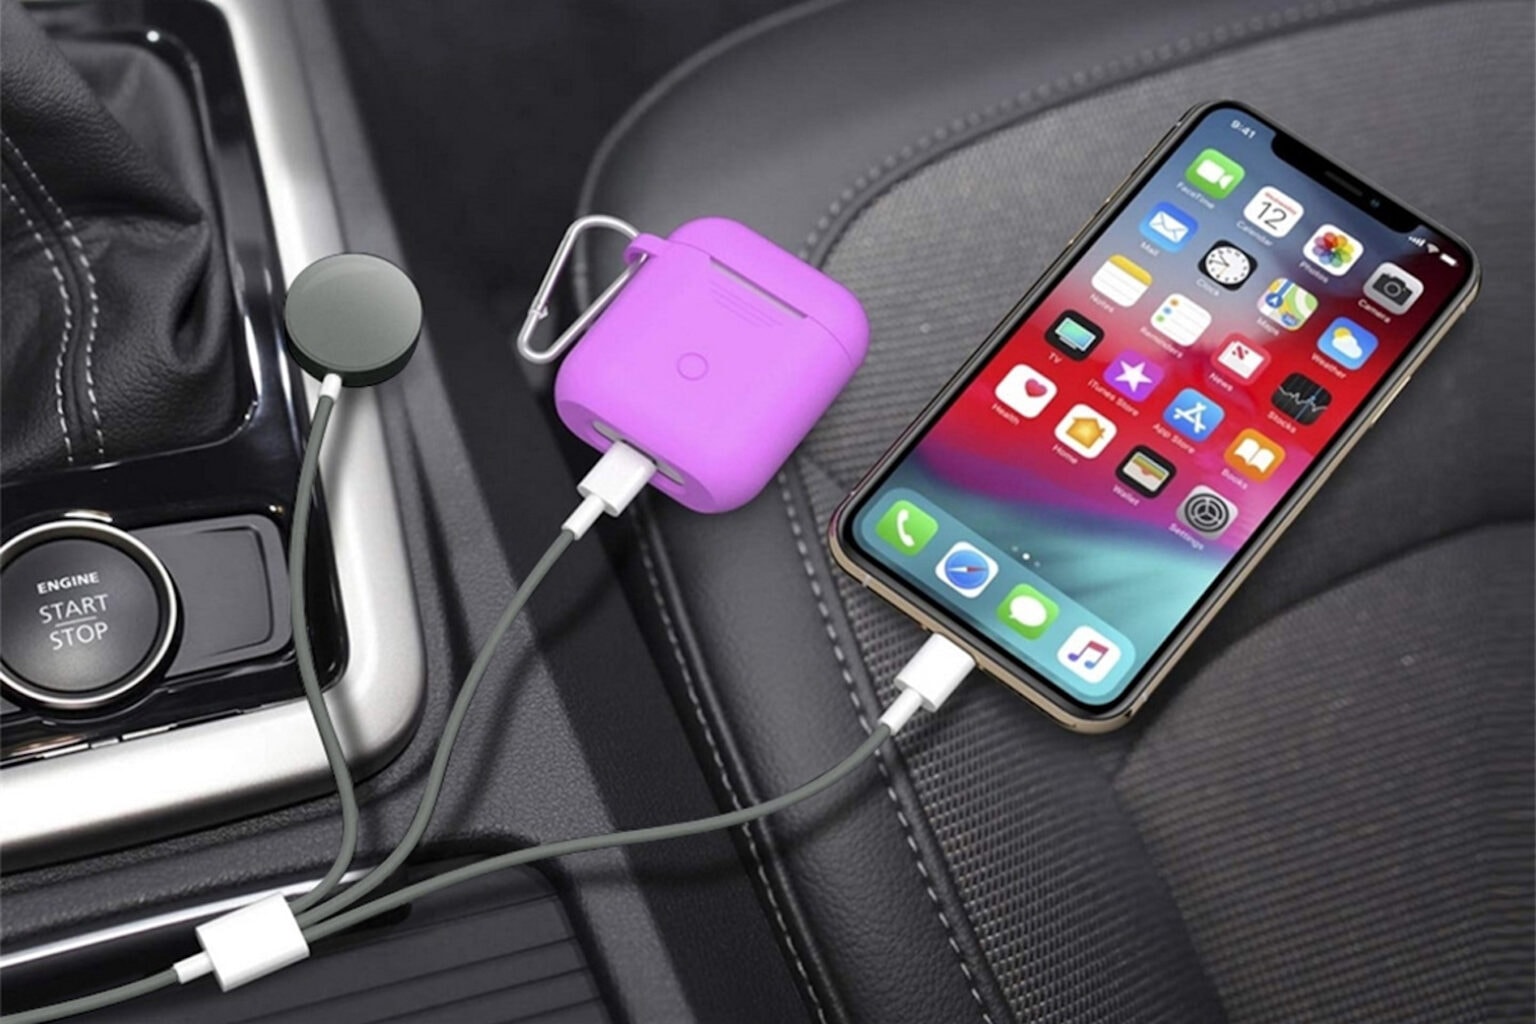 This 3-in-1 charger powers up your Apple devices.